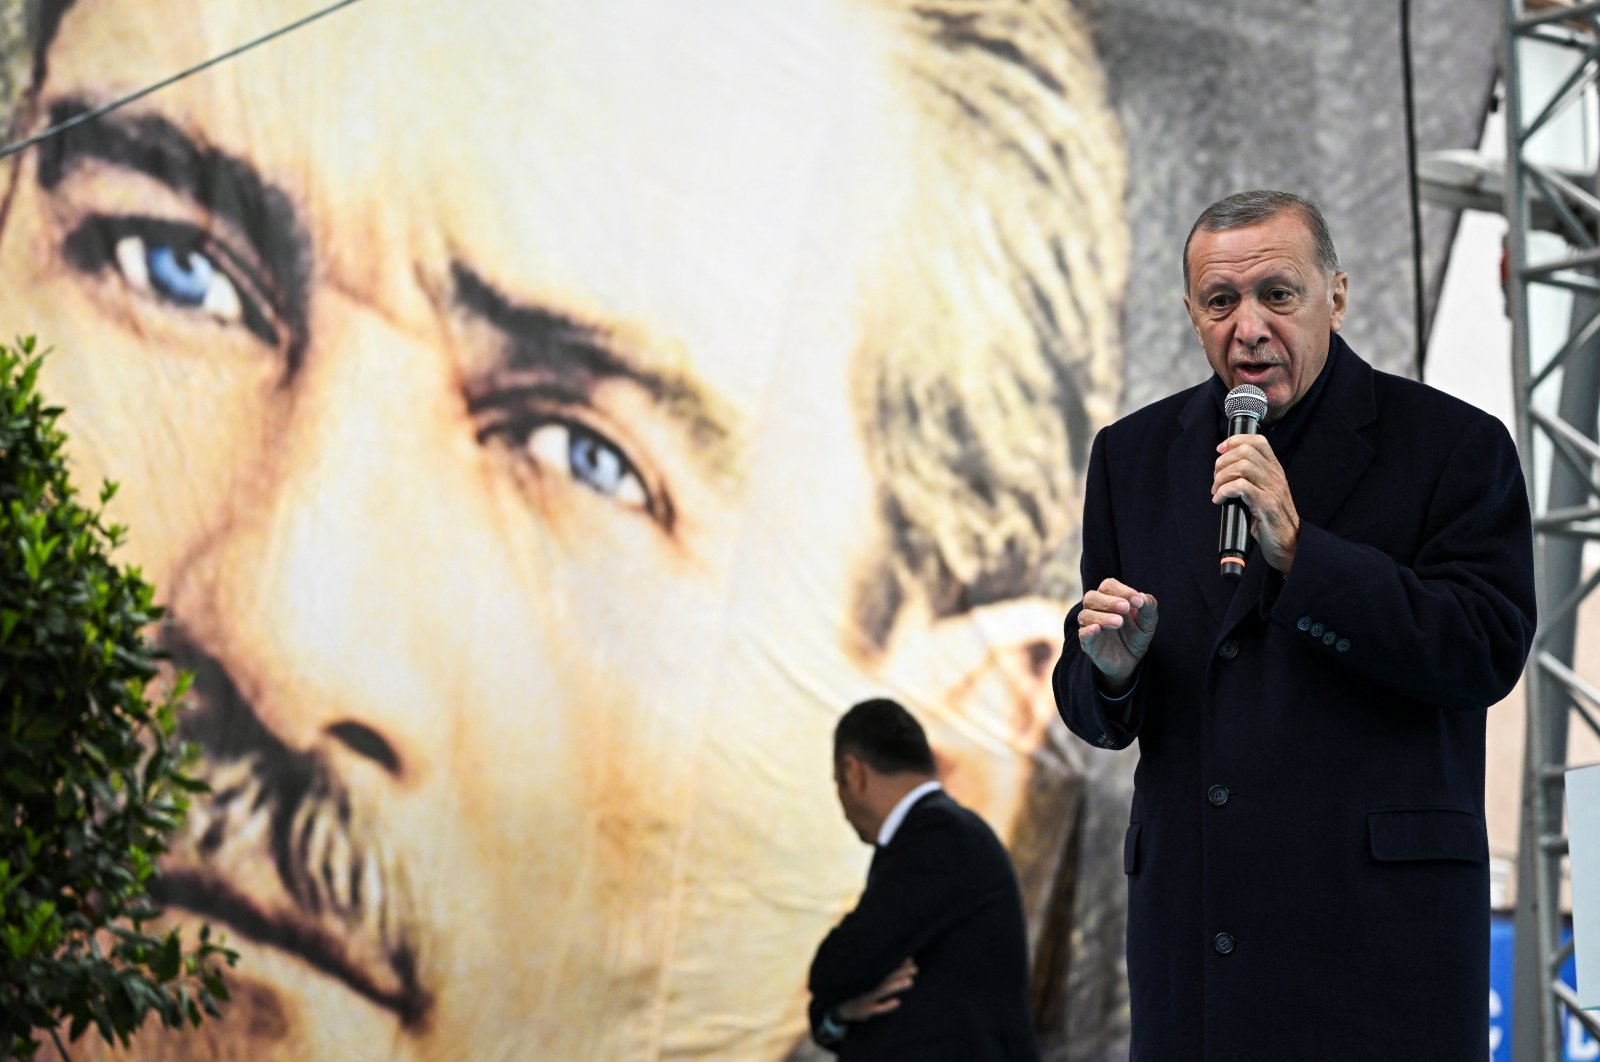 President Recep Tayyip Erdoğan addresses his supporters during a rally, in front of a poster of Mustafa Kemal Atatürk, the founder of modern Türkiye, ahead of the May 14 presidential and parliamentary elections, Istanbul, Türkiye, May 12, 2023. (Reuters Photo)